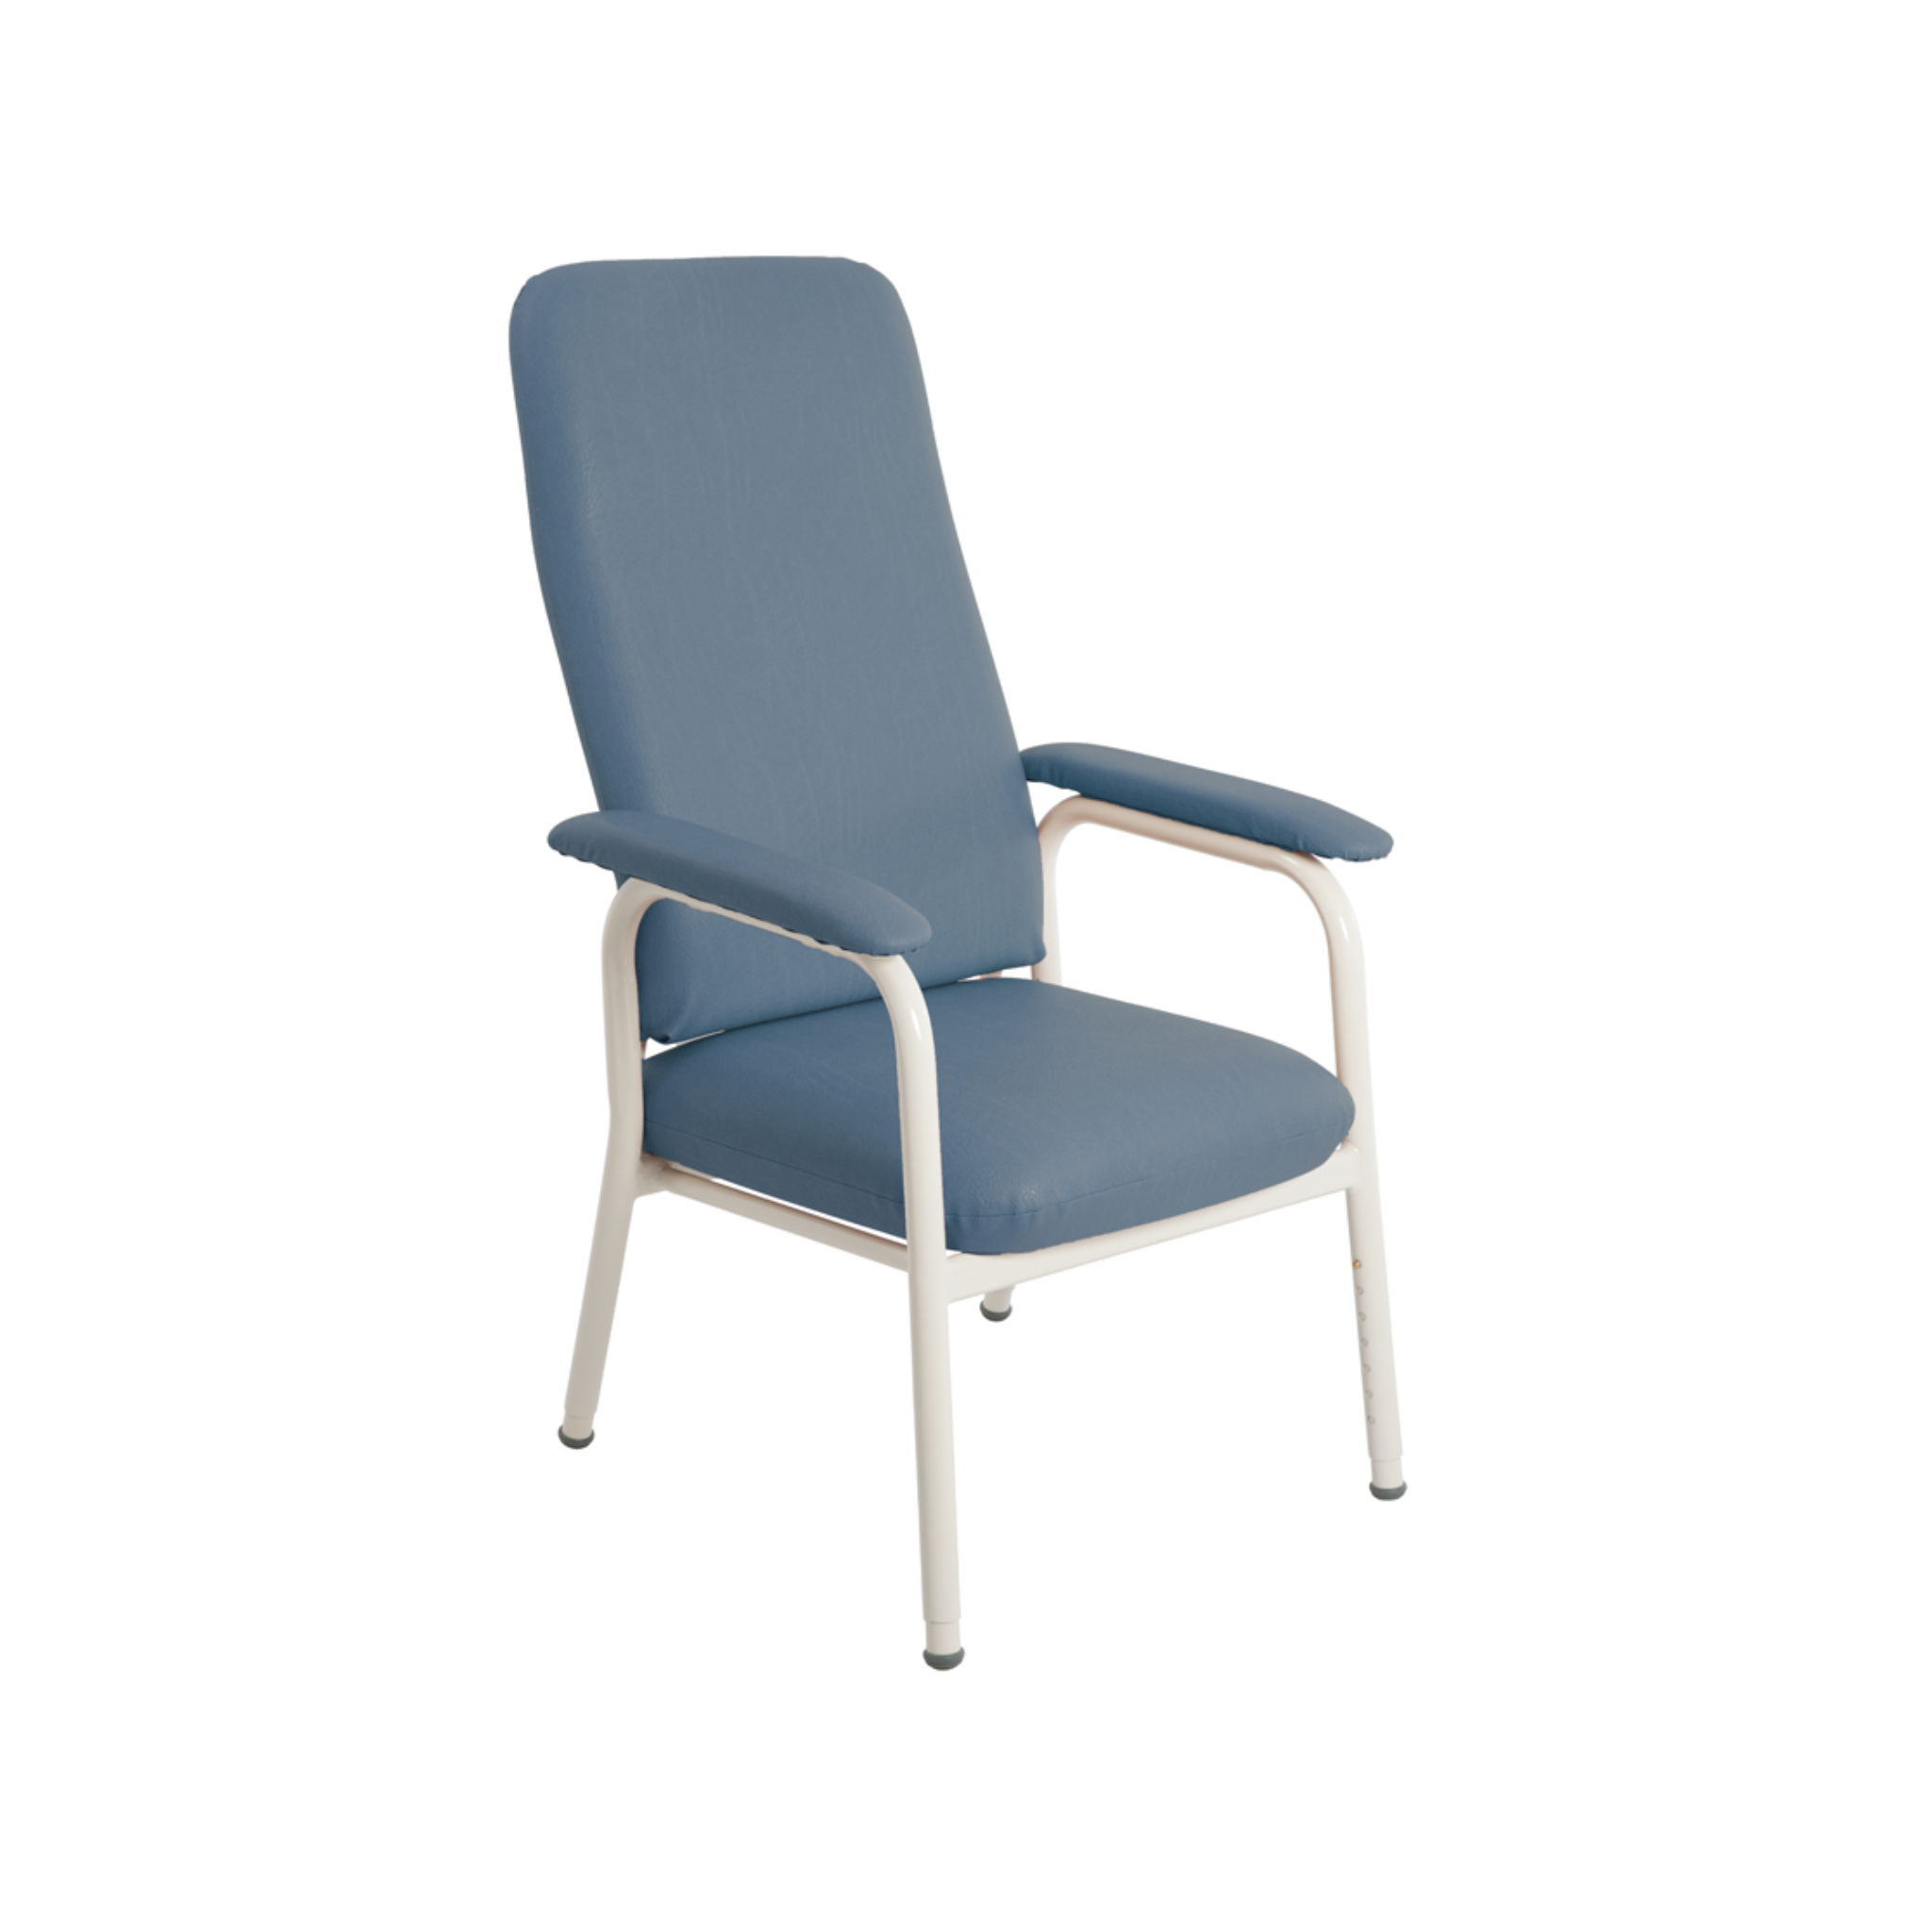 Rental - High Back Chair, Blue from Aged Care and Medical - High Back Chair for Hire for Aged Care